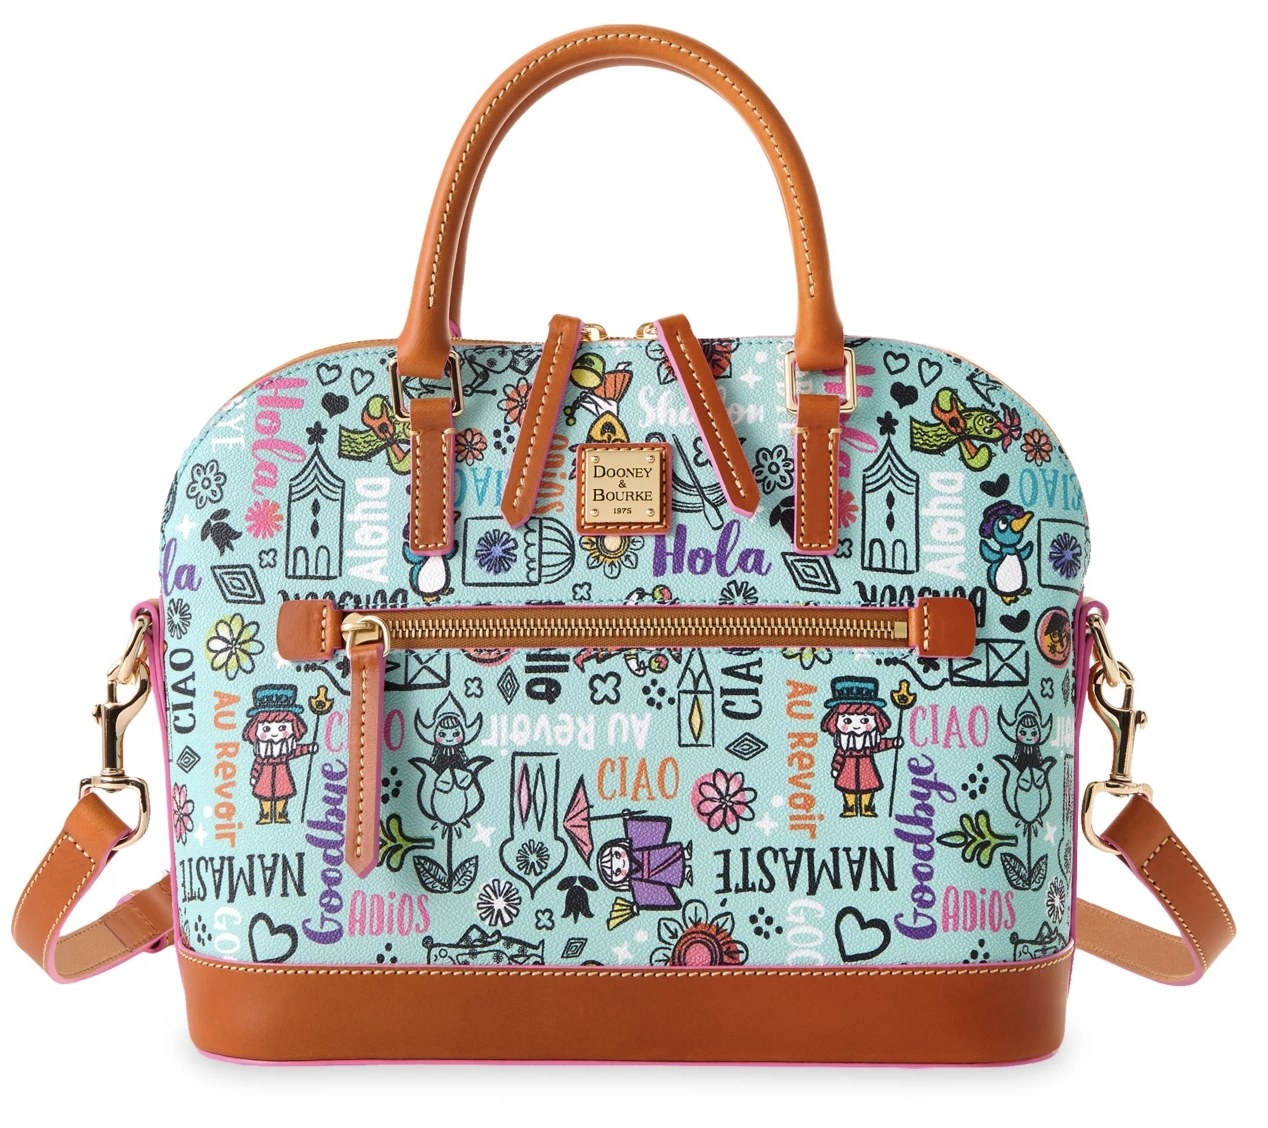 Dooney &amp;amp; Burke leather finished satchel bag with illustrations of Small World dolls and phrases